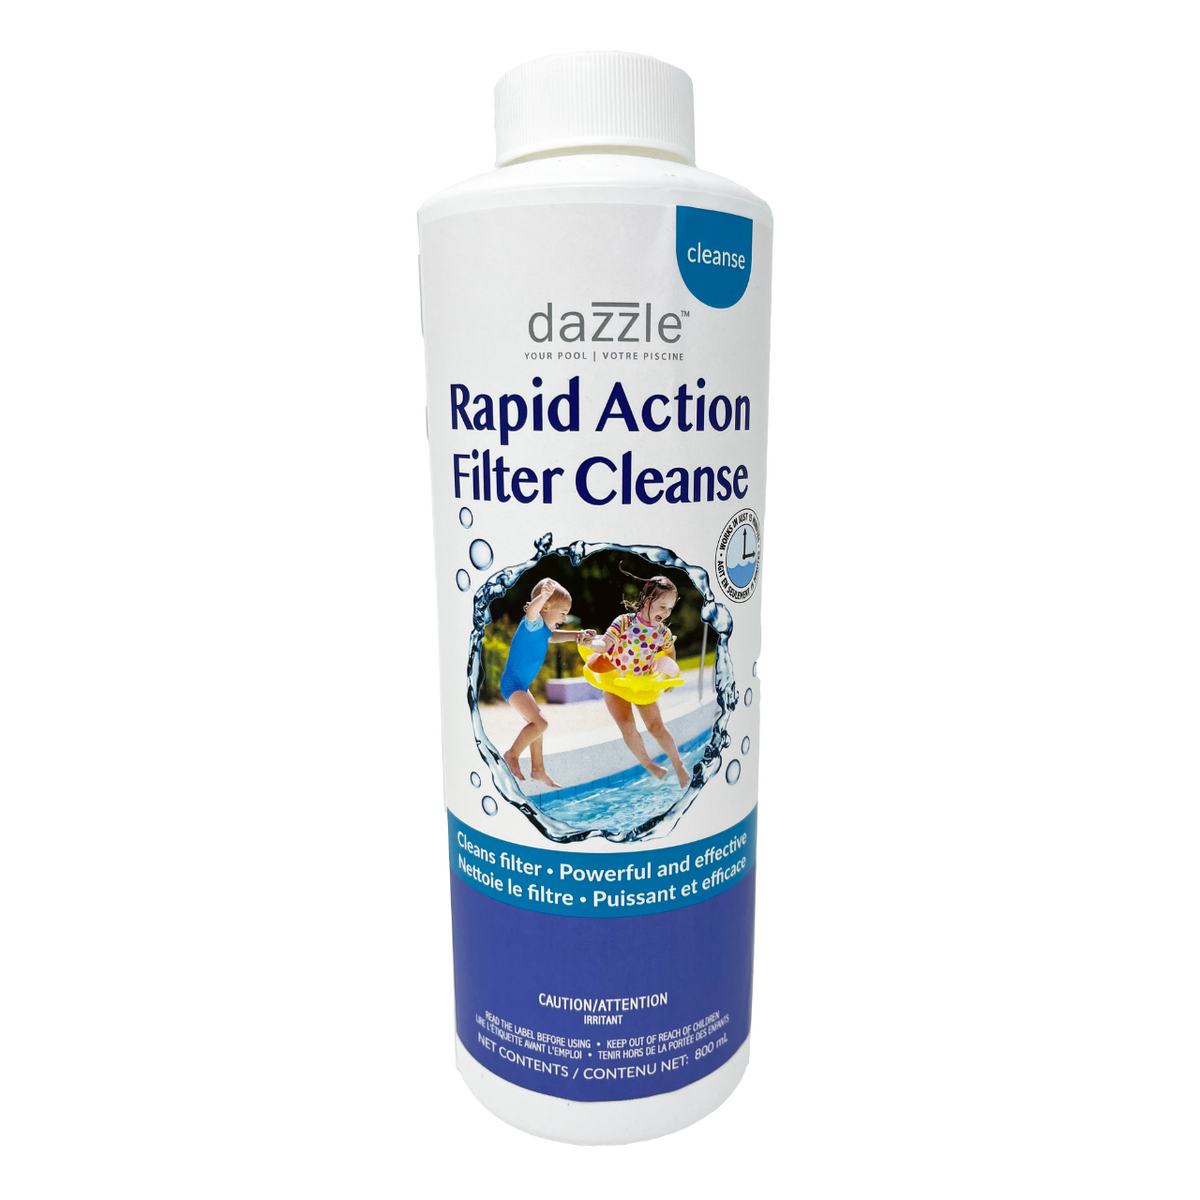 Dazzle™ Rapid Action Filter Cleanse